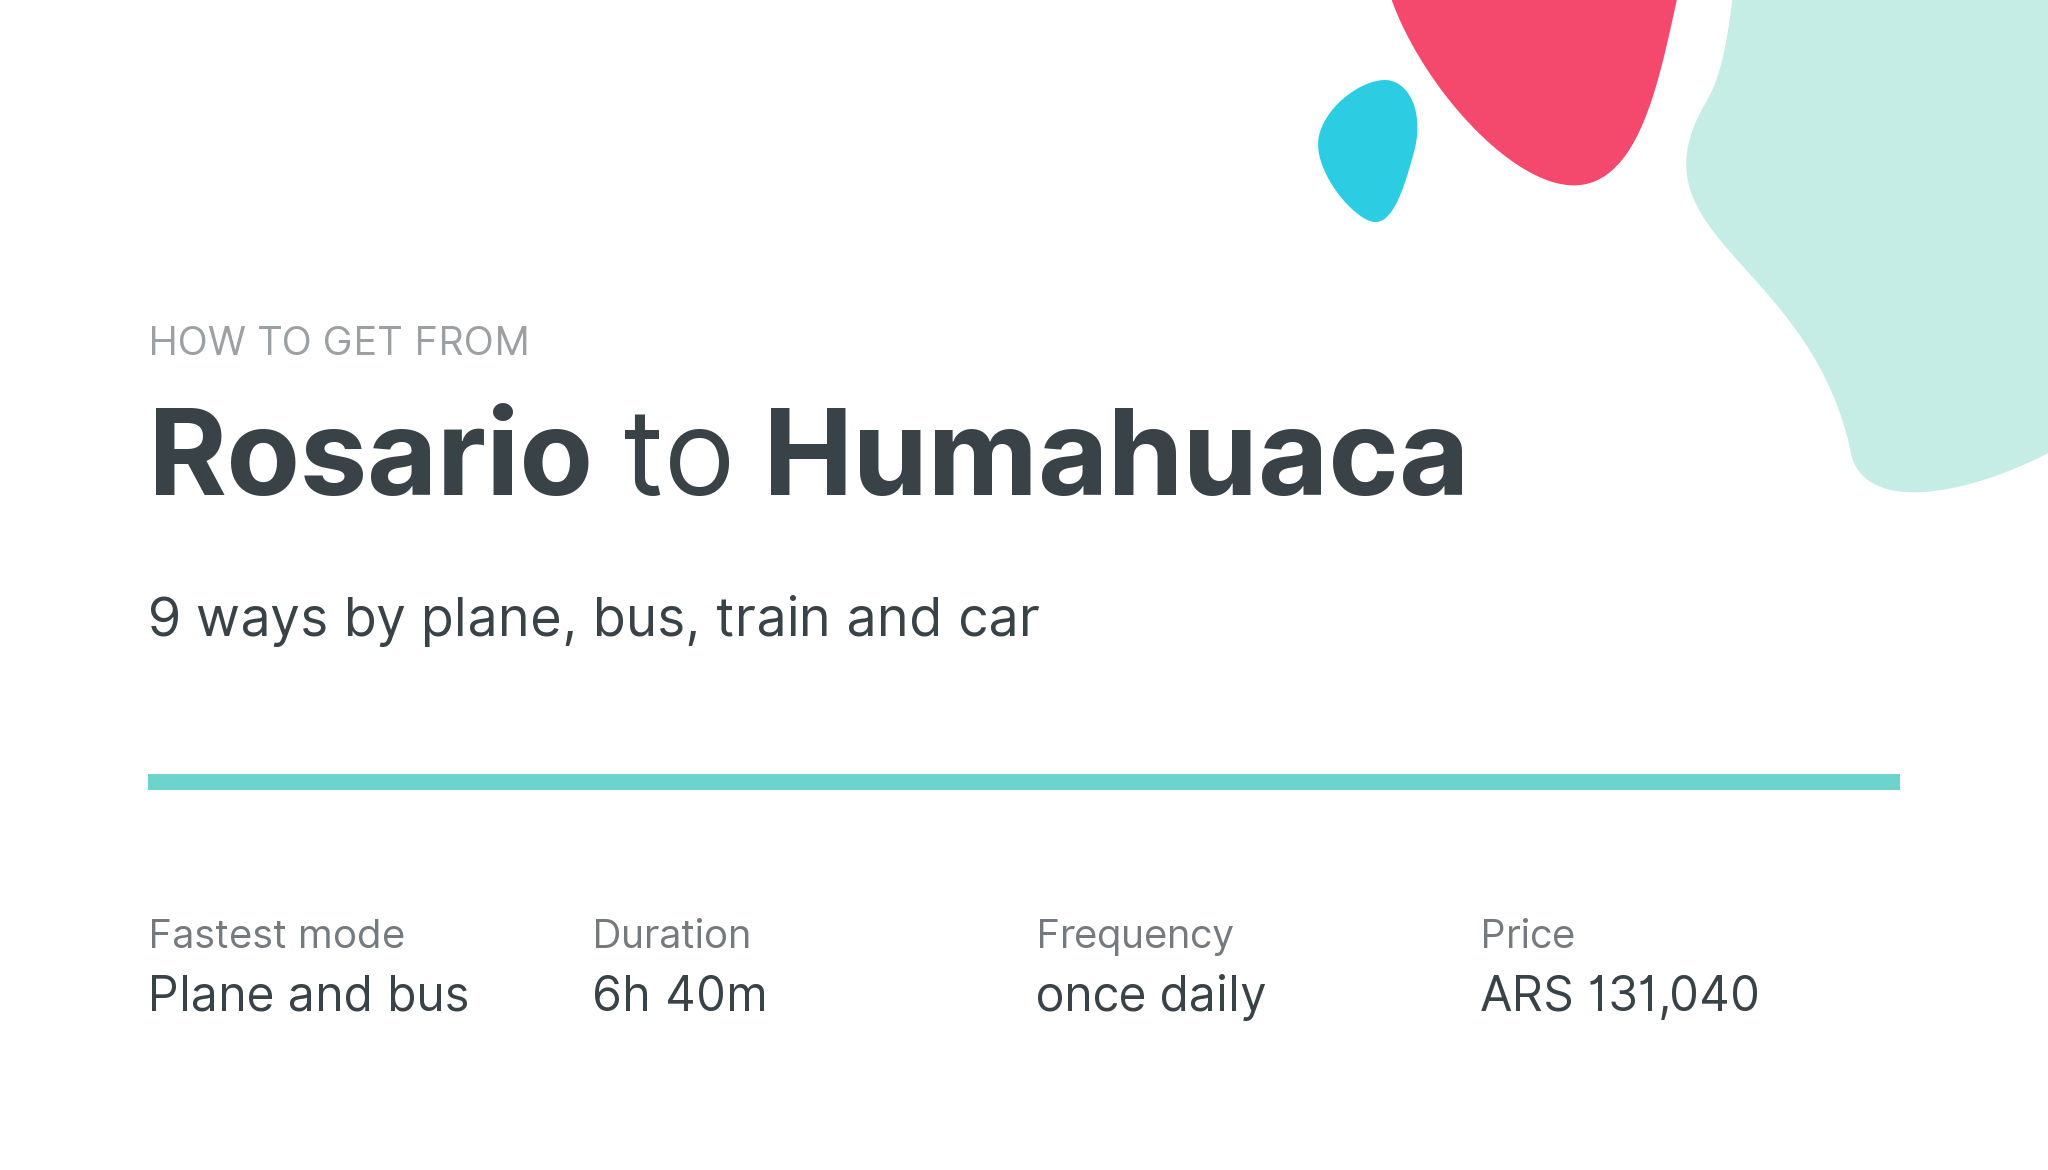 How do I get from Rosario to Humahuaca